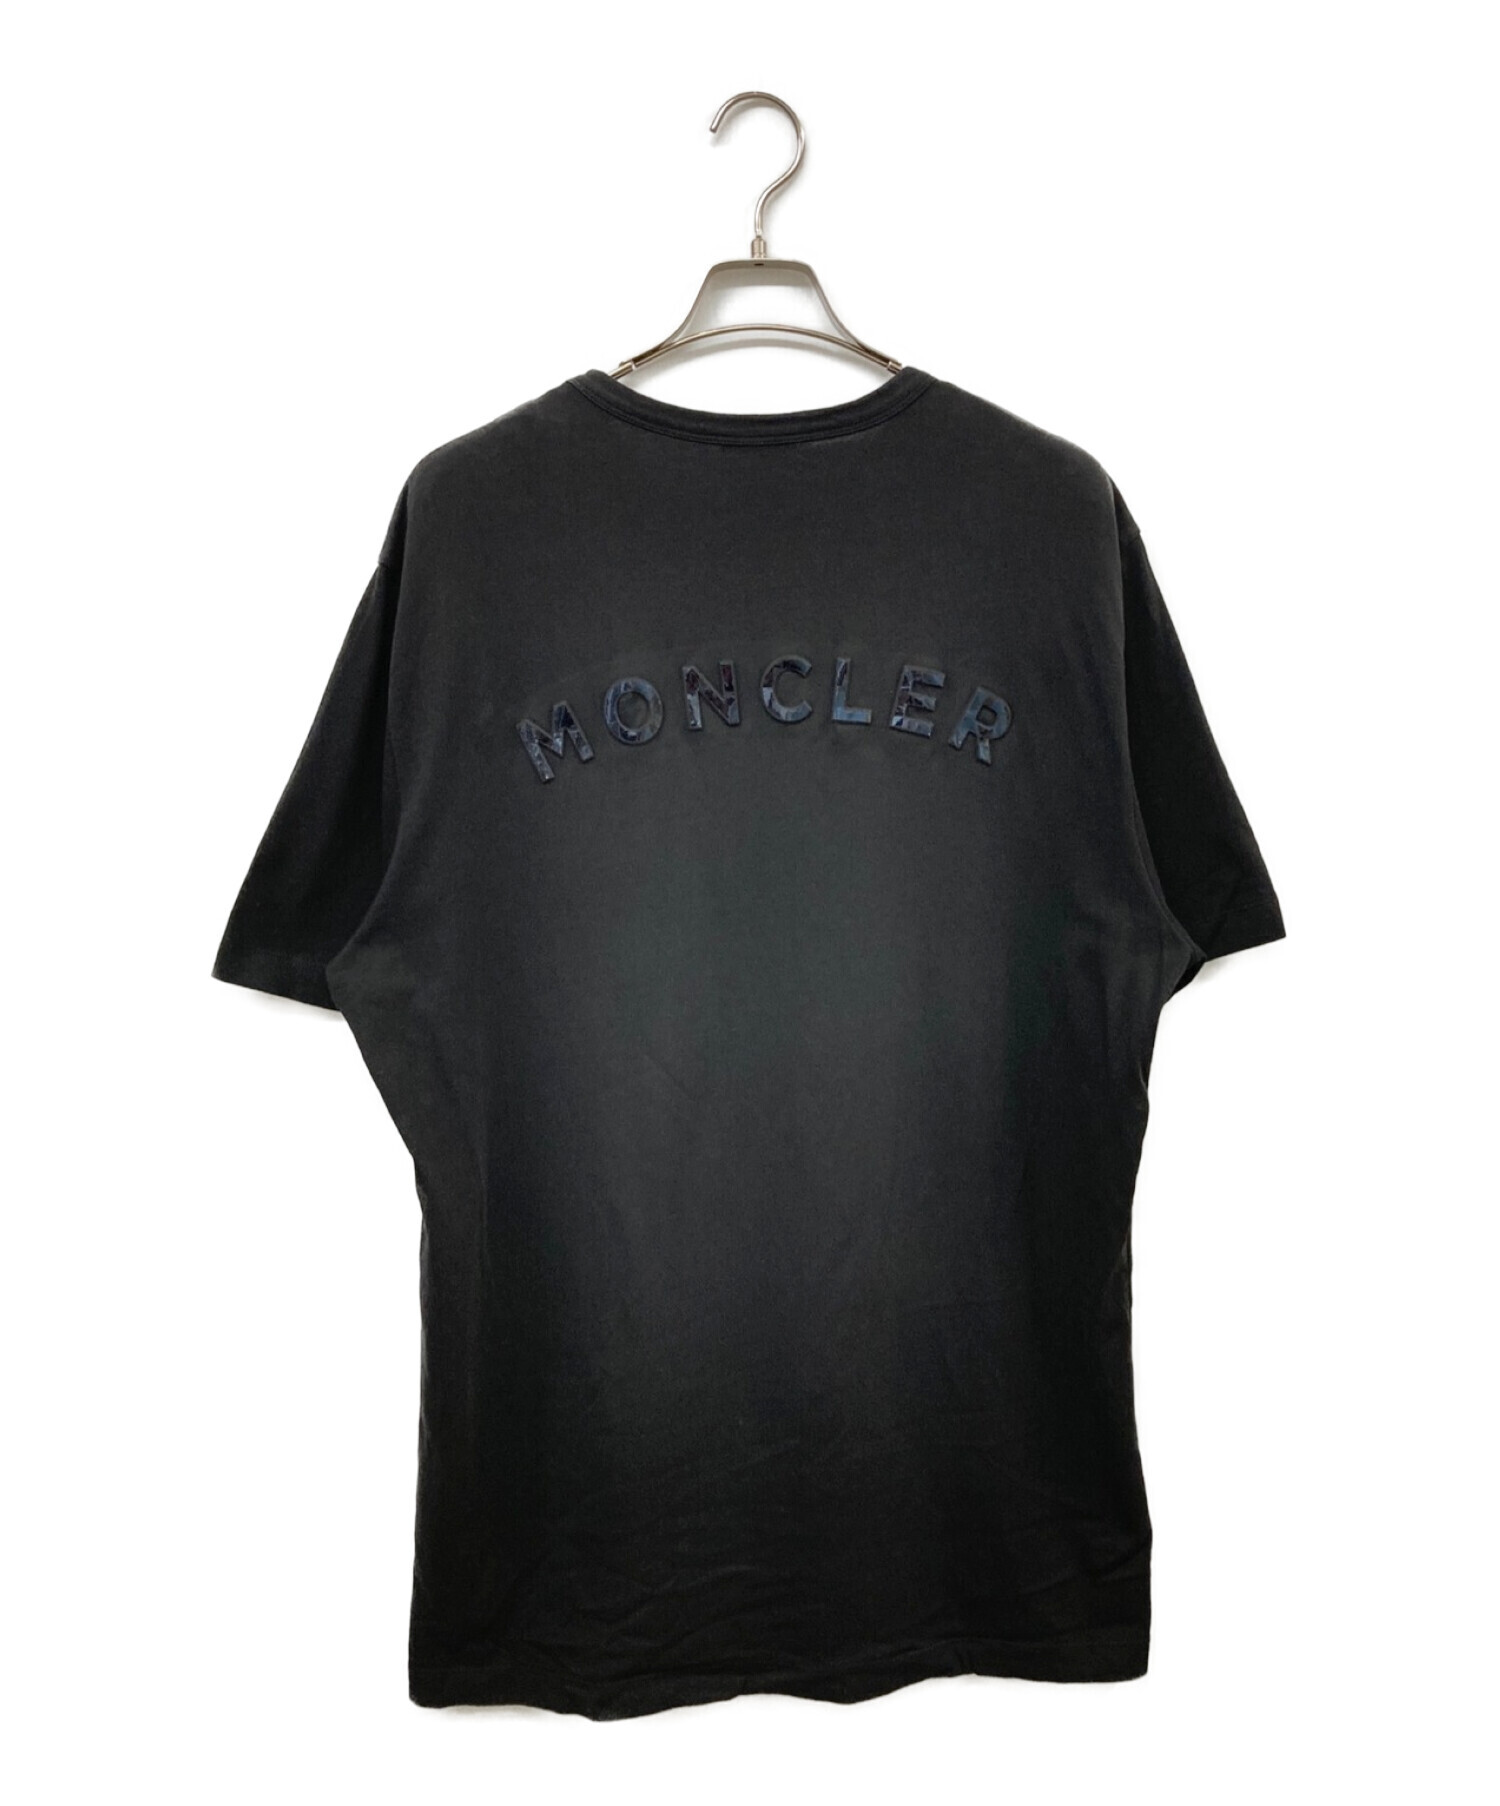 MONCLER MAGLIA T-SHIRT モンクレール マグリアTシャツモンクレール